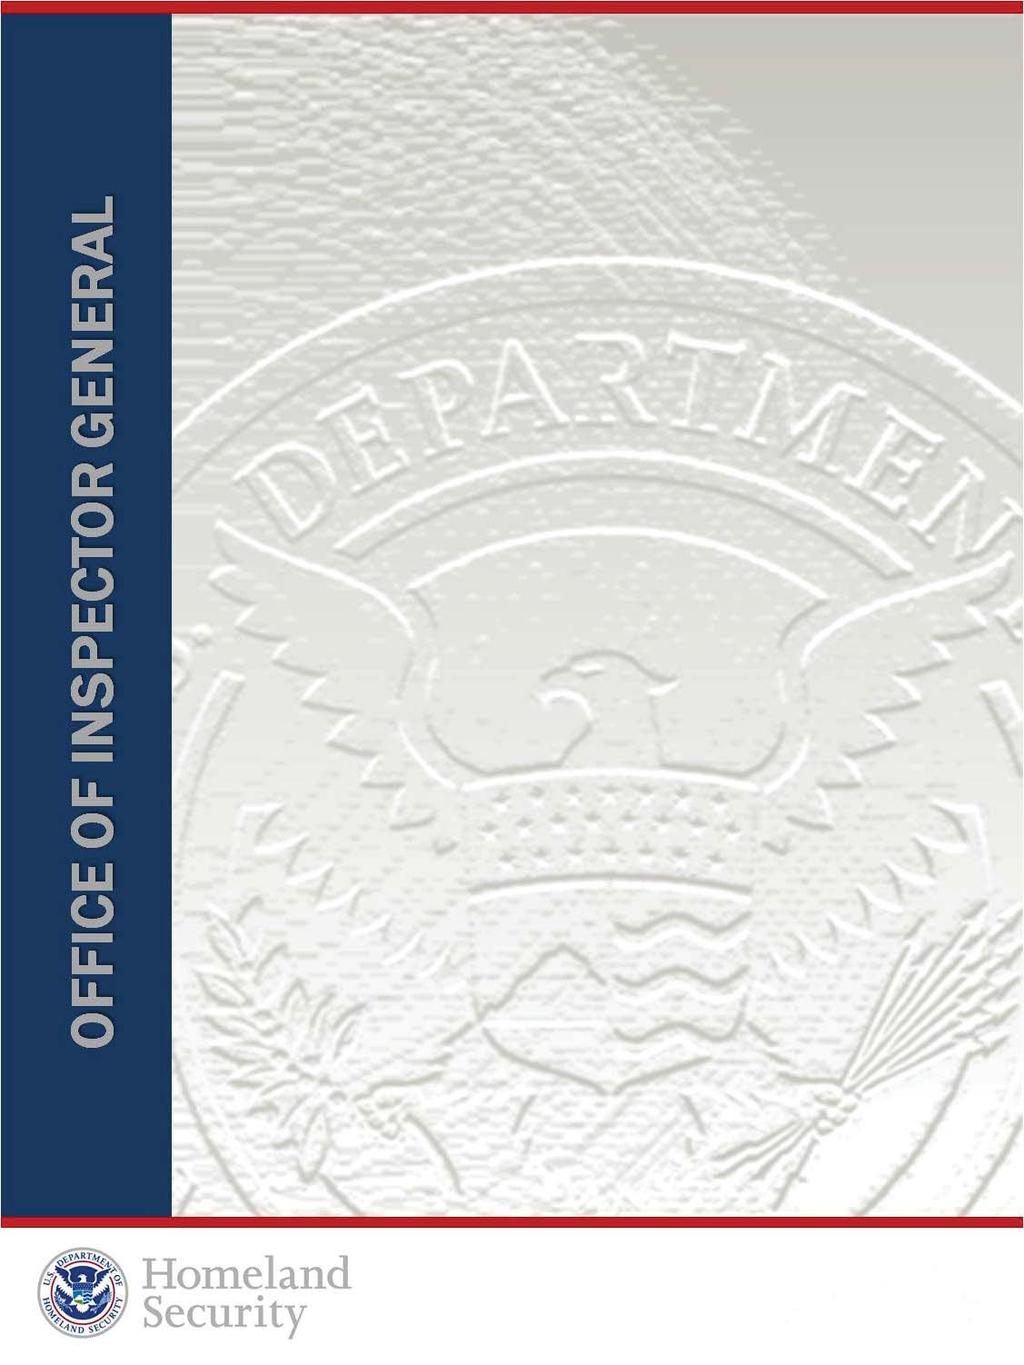 CBP s Border Security Efforts An Analysis of Southwest Border